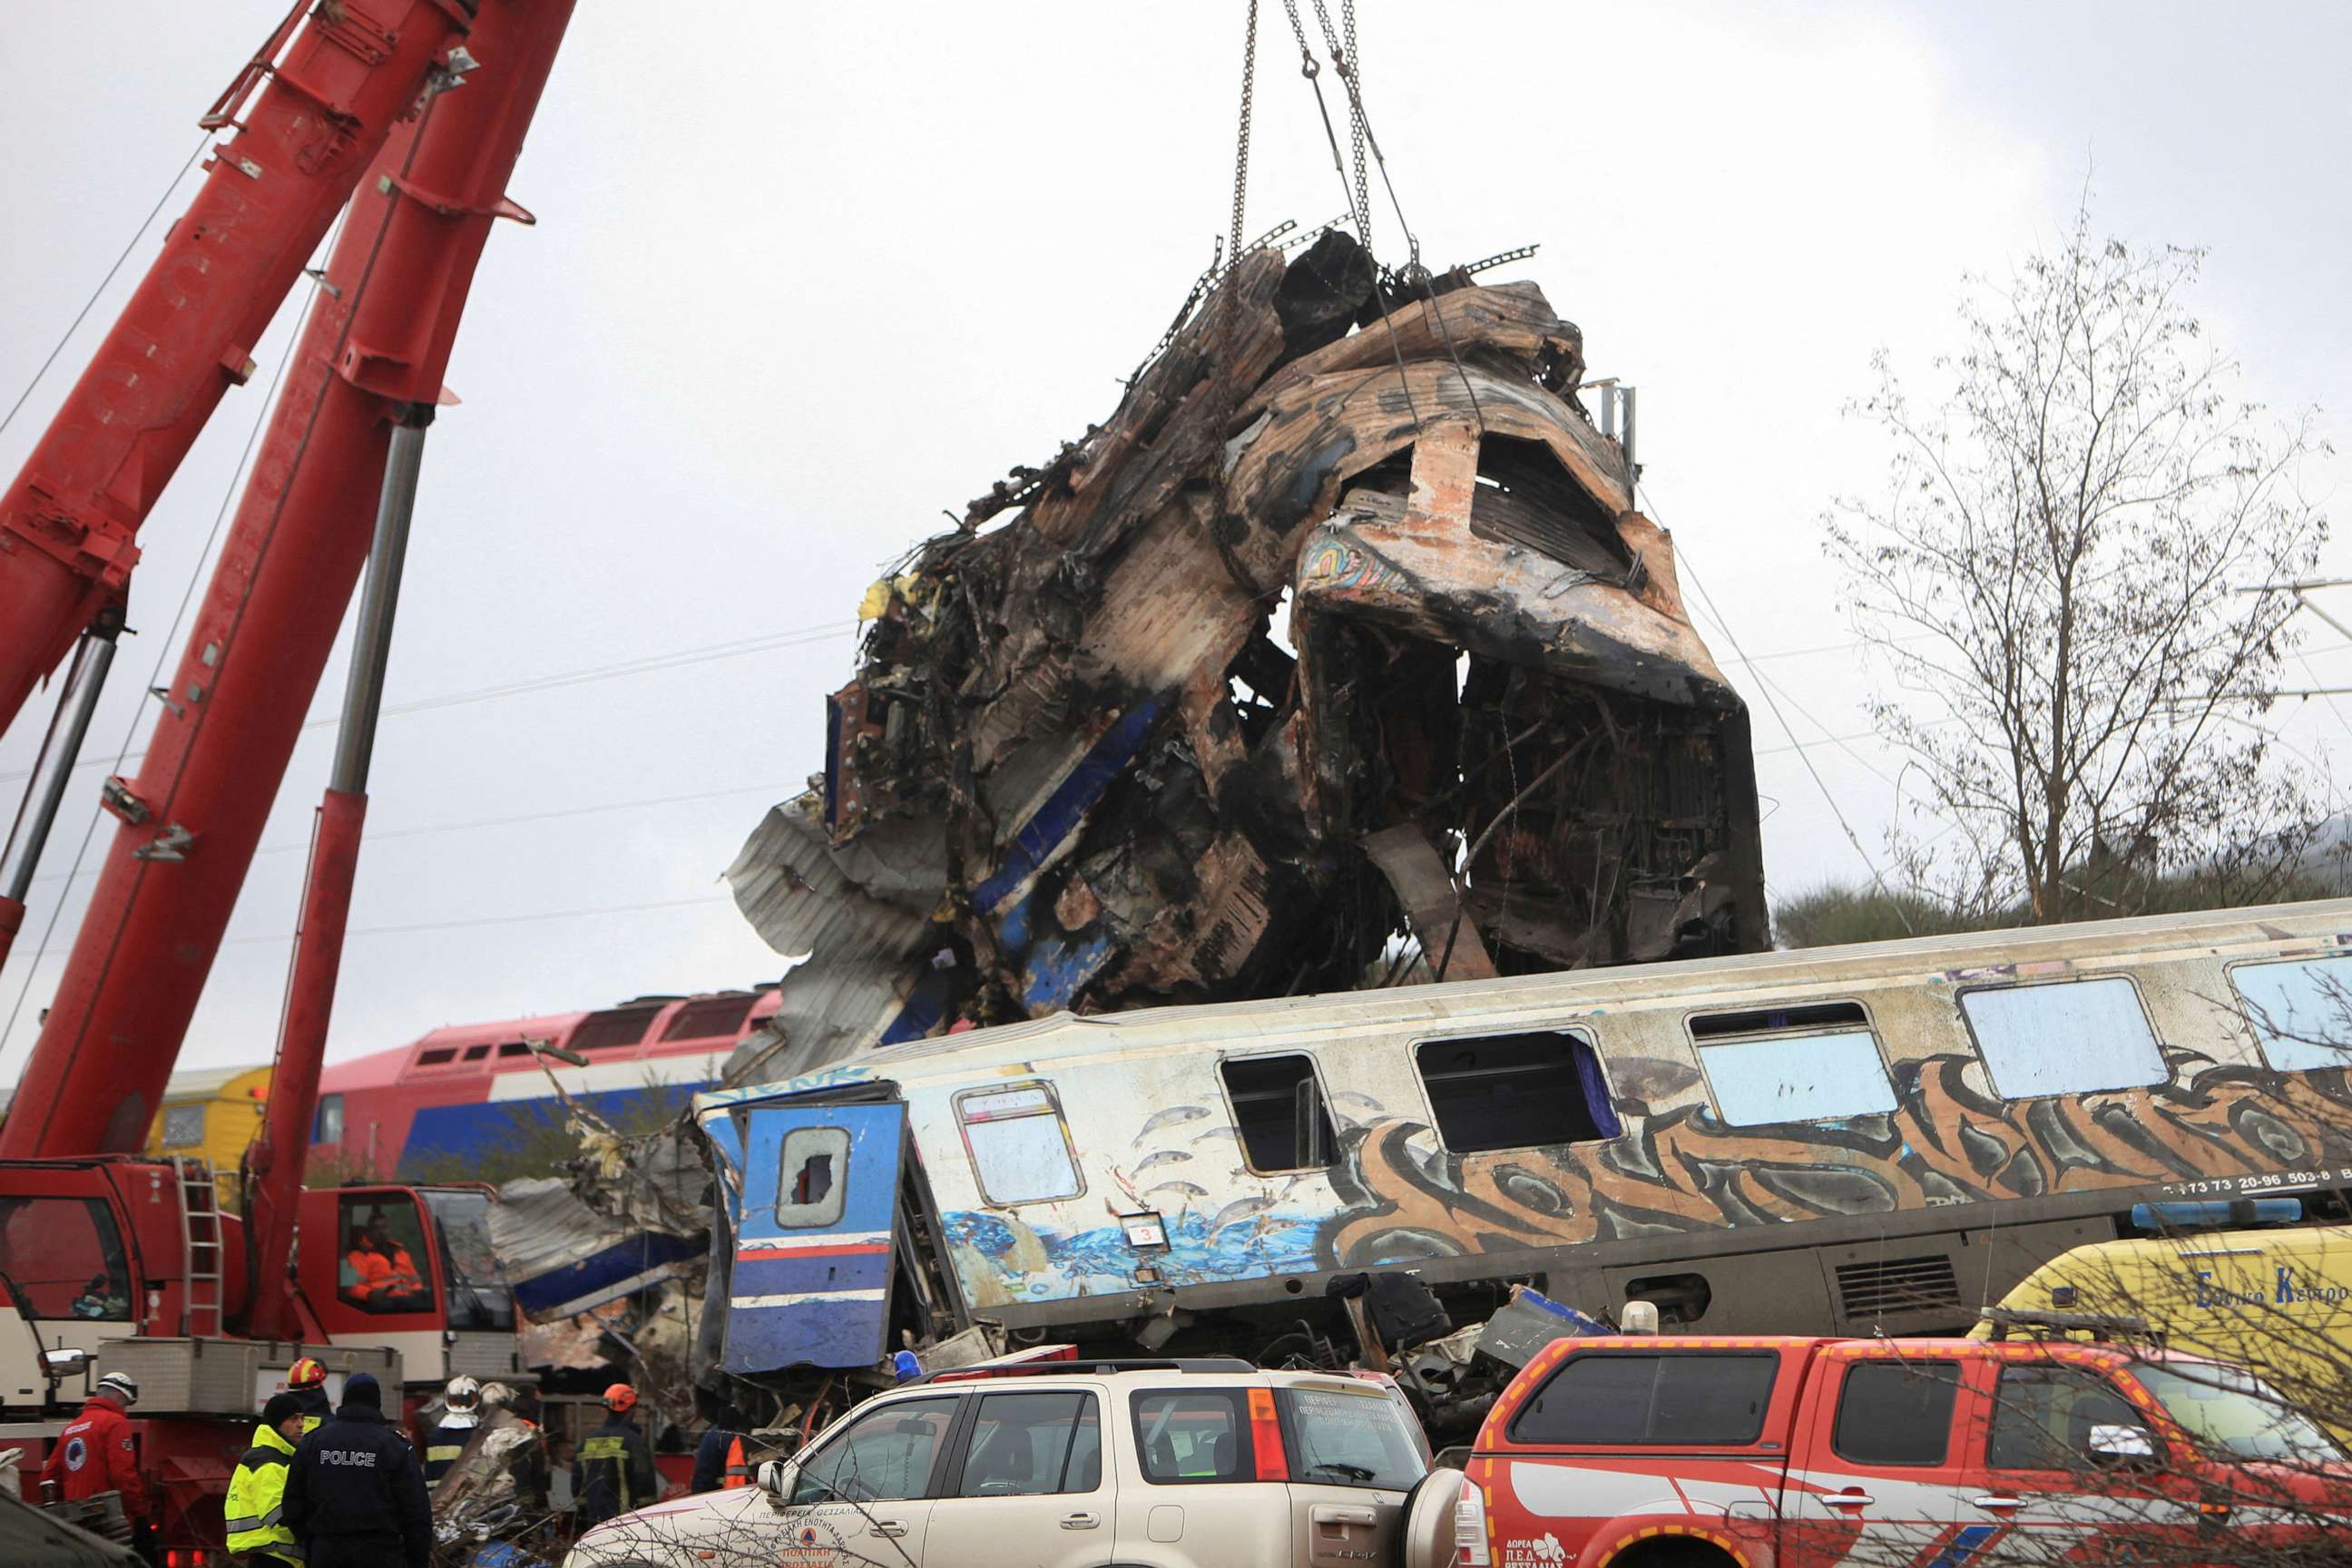 PHOTO: A crane lifts parts of a destroyed carriage as rescuers operate on the site of a crash, where two trains collided, near the city of Larissa, Greece, March 2, 2023.